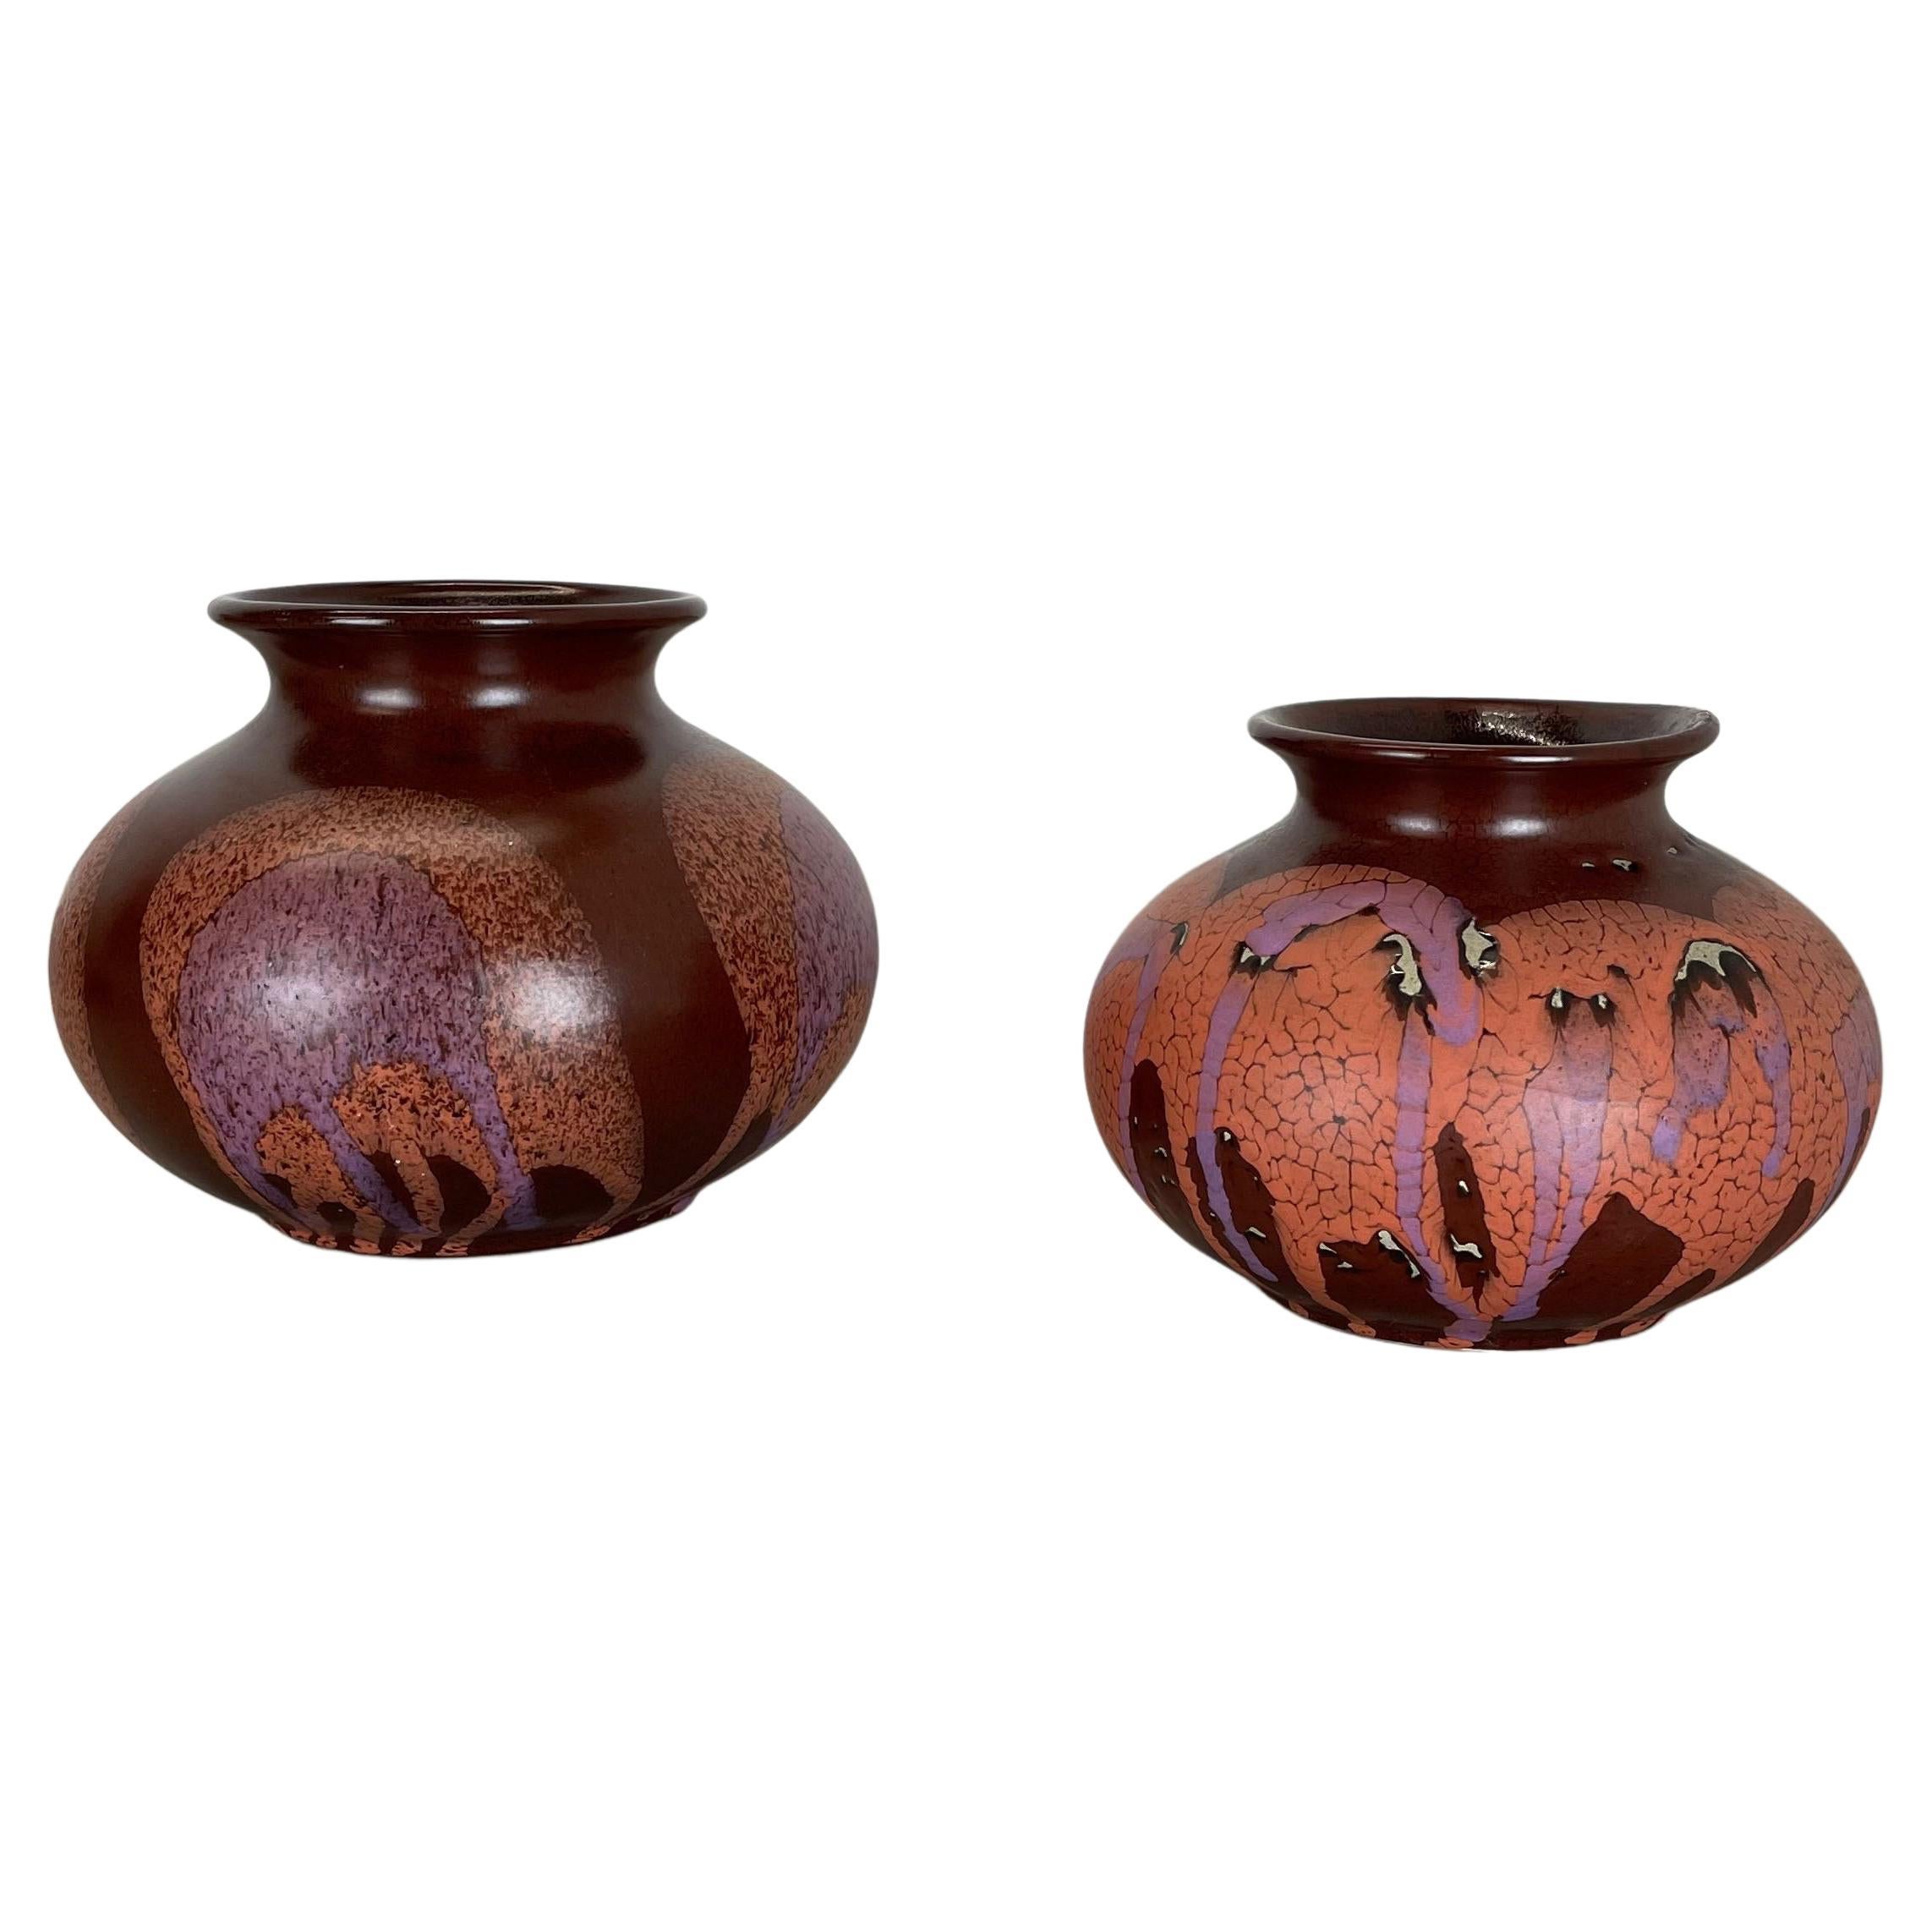 Set of Two Pottery Vases Objects by Steuler Ceramics, Germany, 1970s For Sale